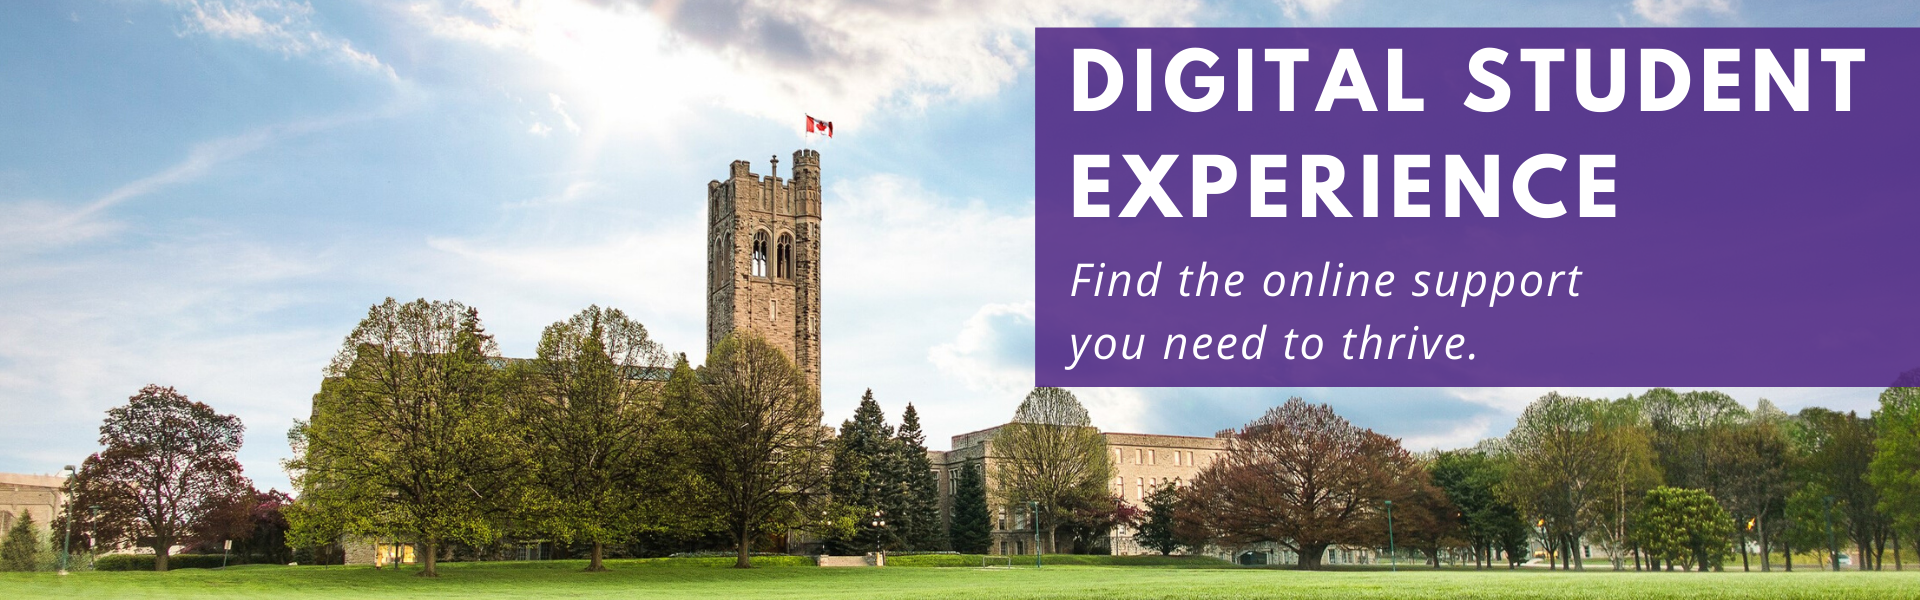 Digital Student Experience - find the online support you need to thrive